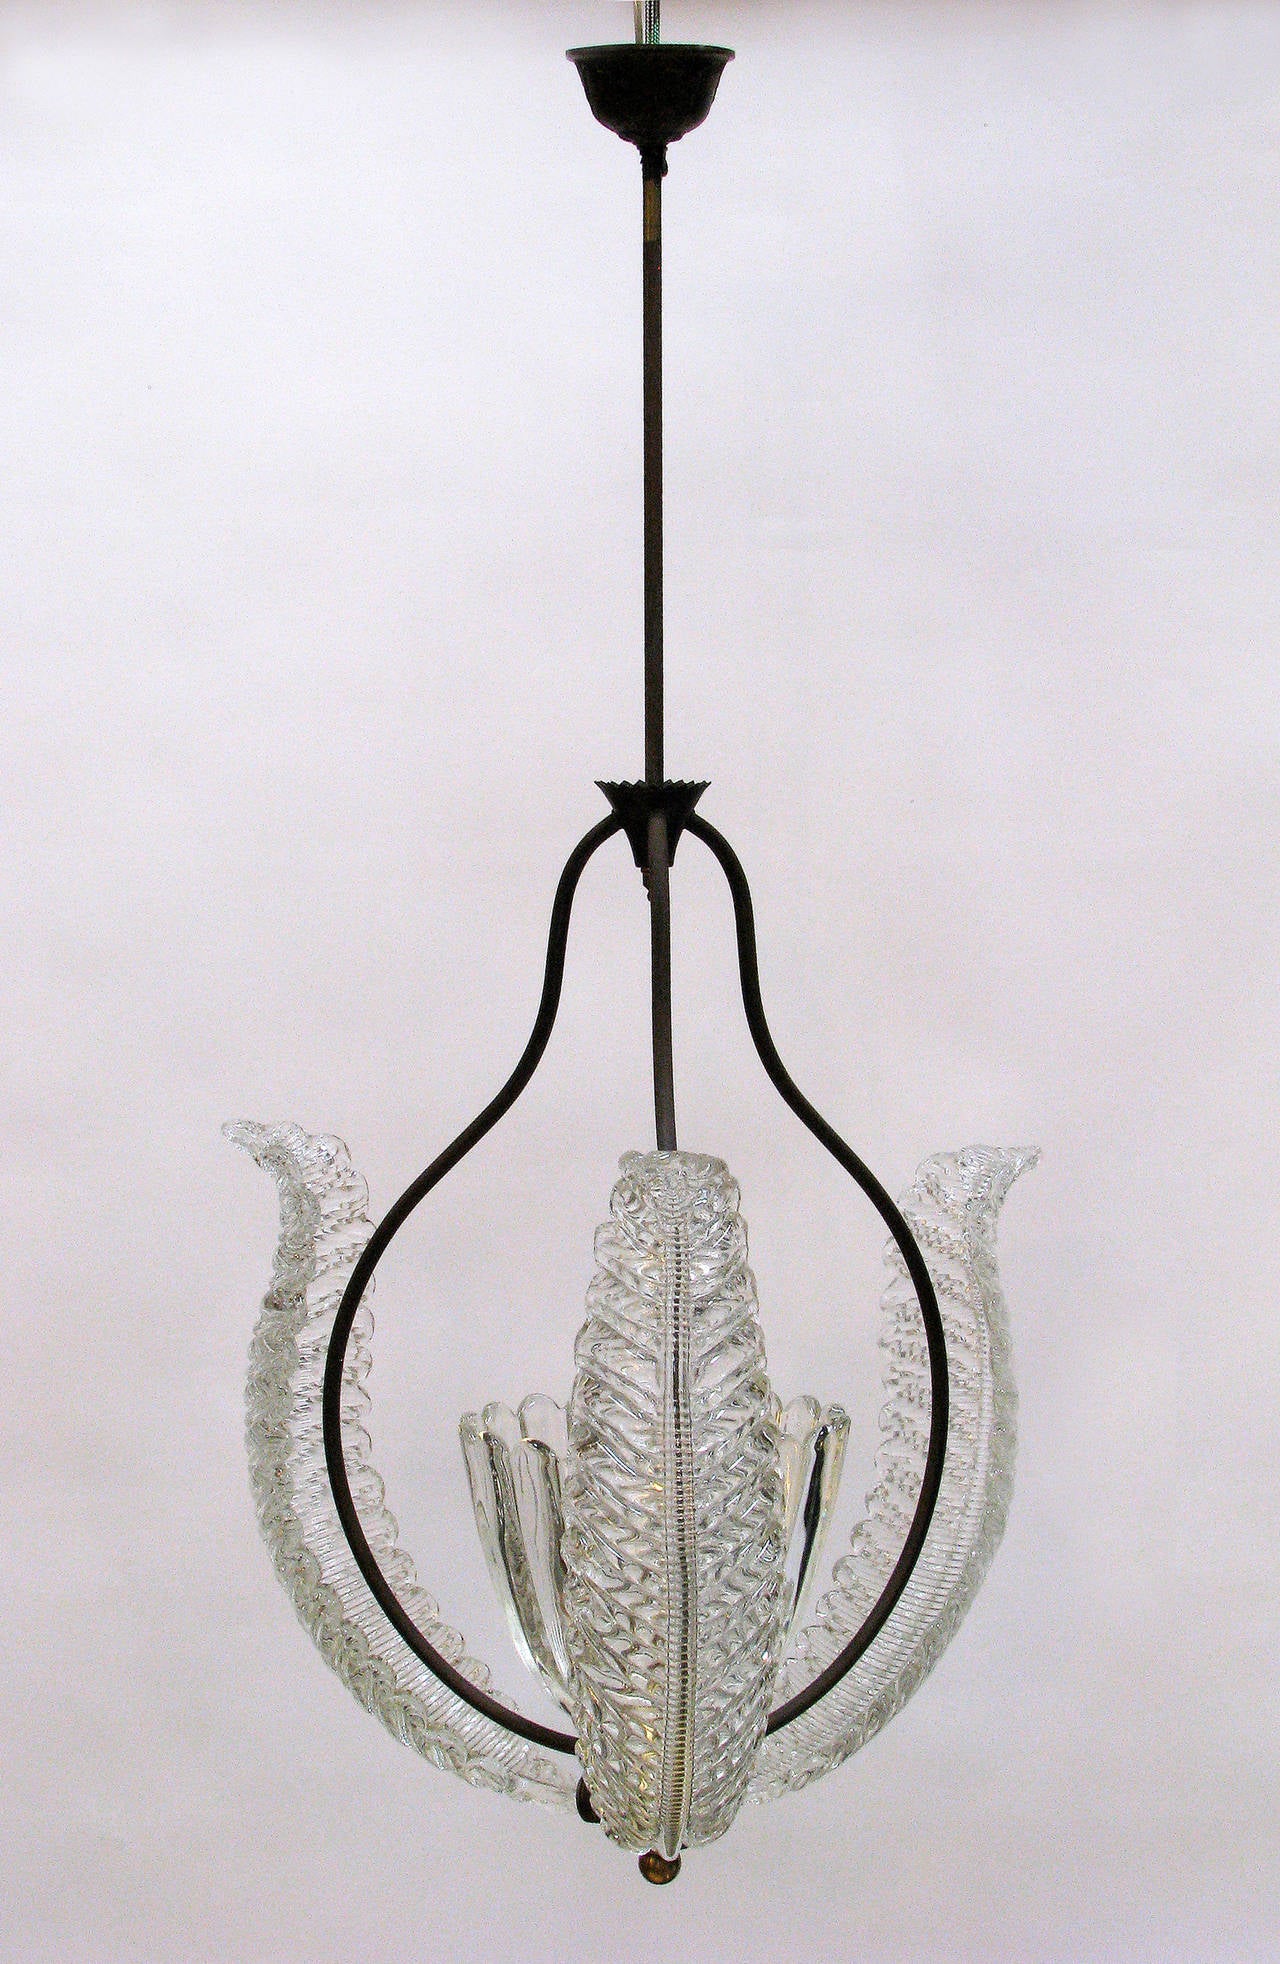 Barovier glass bell and leaves chandelier
handblown glass.
The metal rod connecting to the canopy can be shortened or extended upon request.